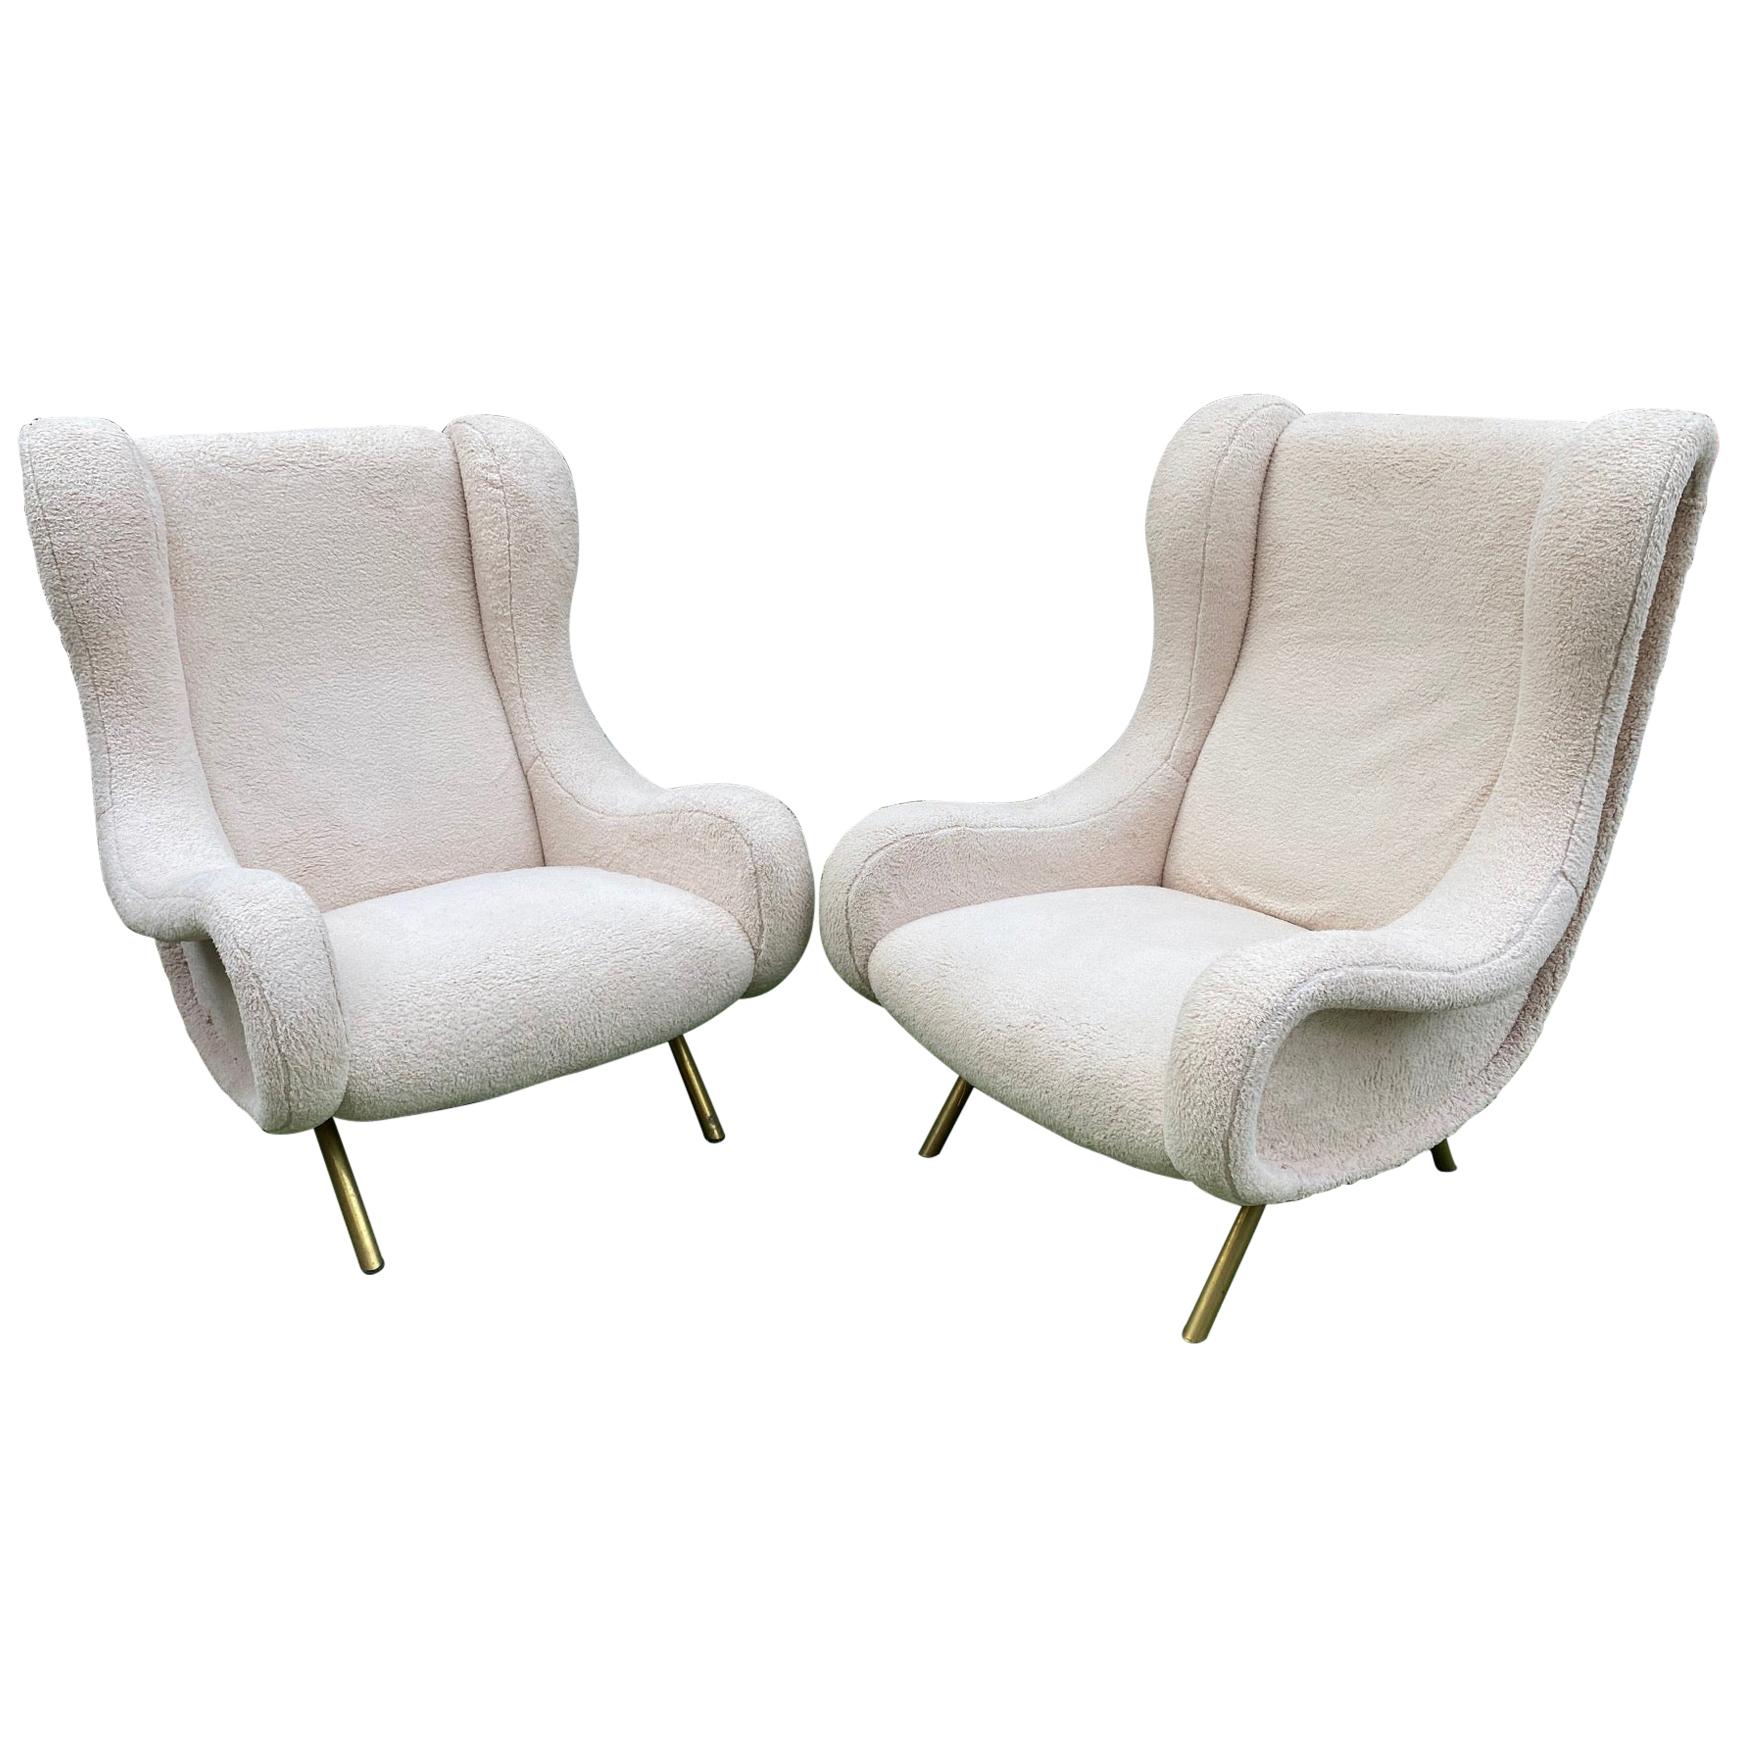 Pair of Senior Armchairs by Marco Zanuso for Arflex, 1950s